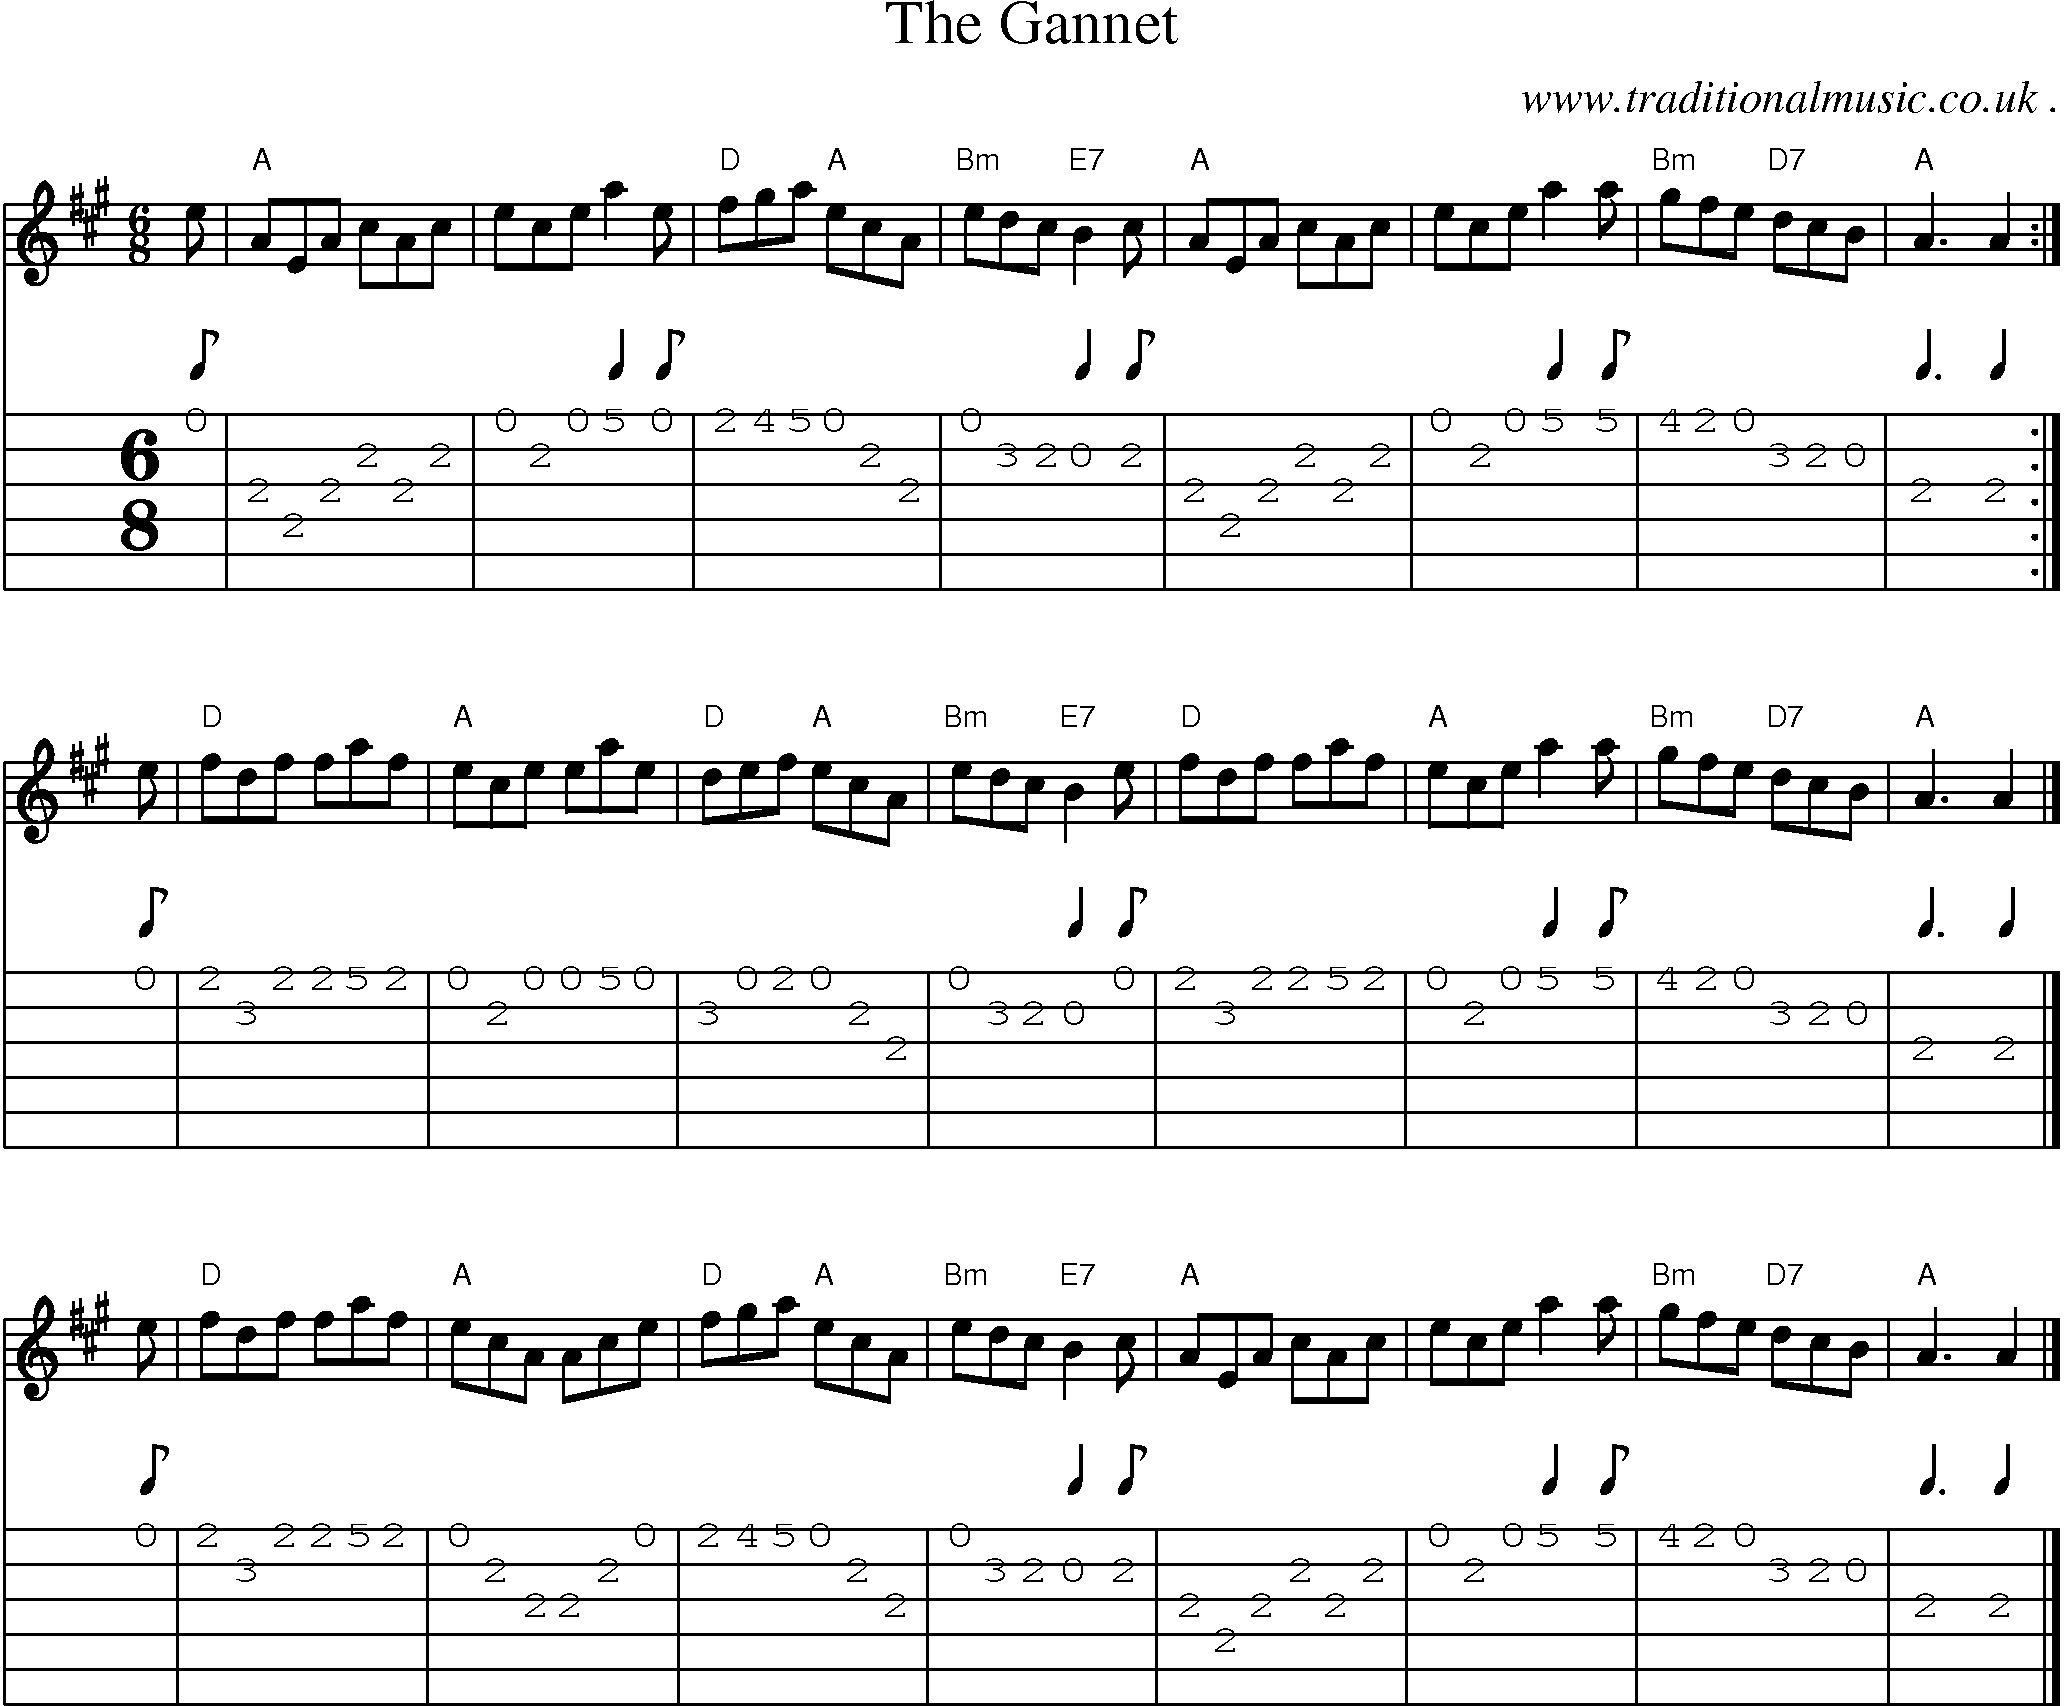 Sheet-music  score, Chords and Guitar Tabs for The Gannet